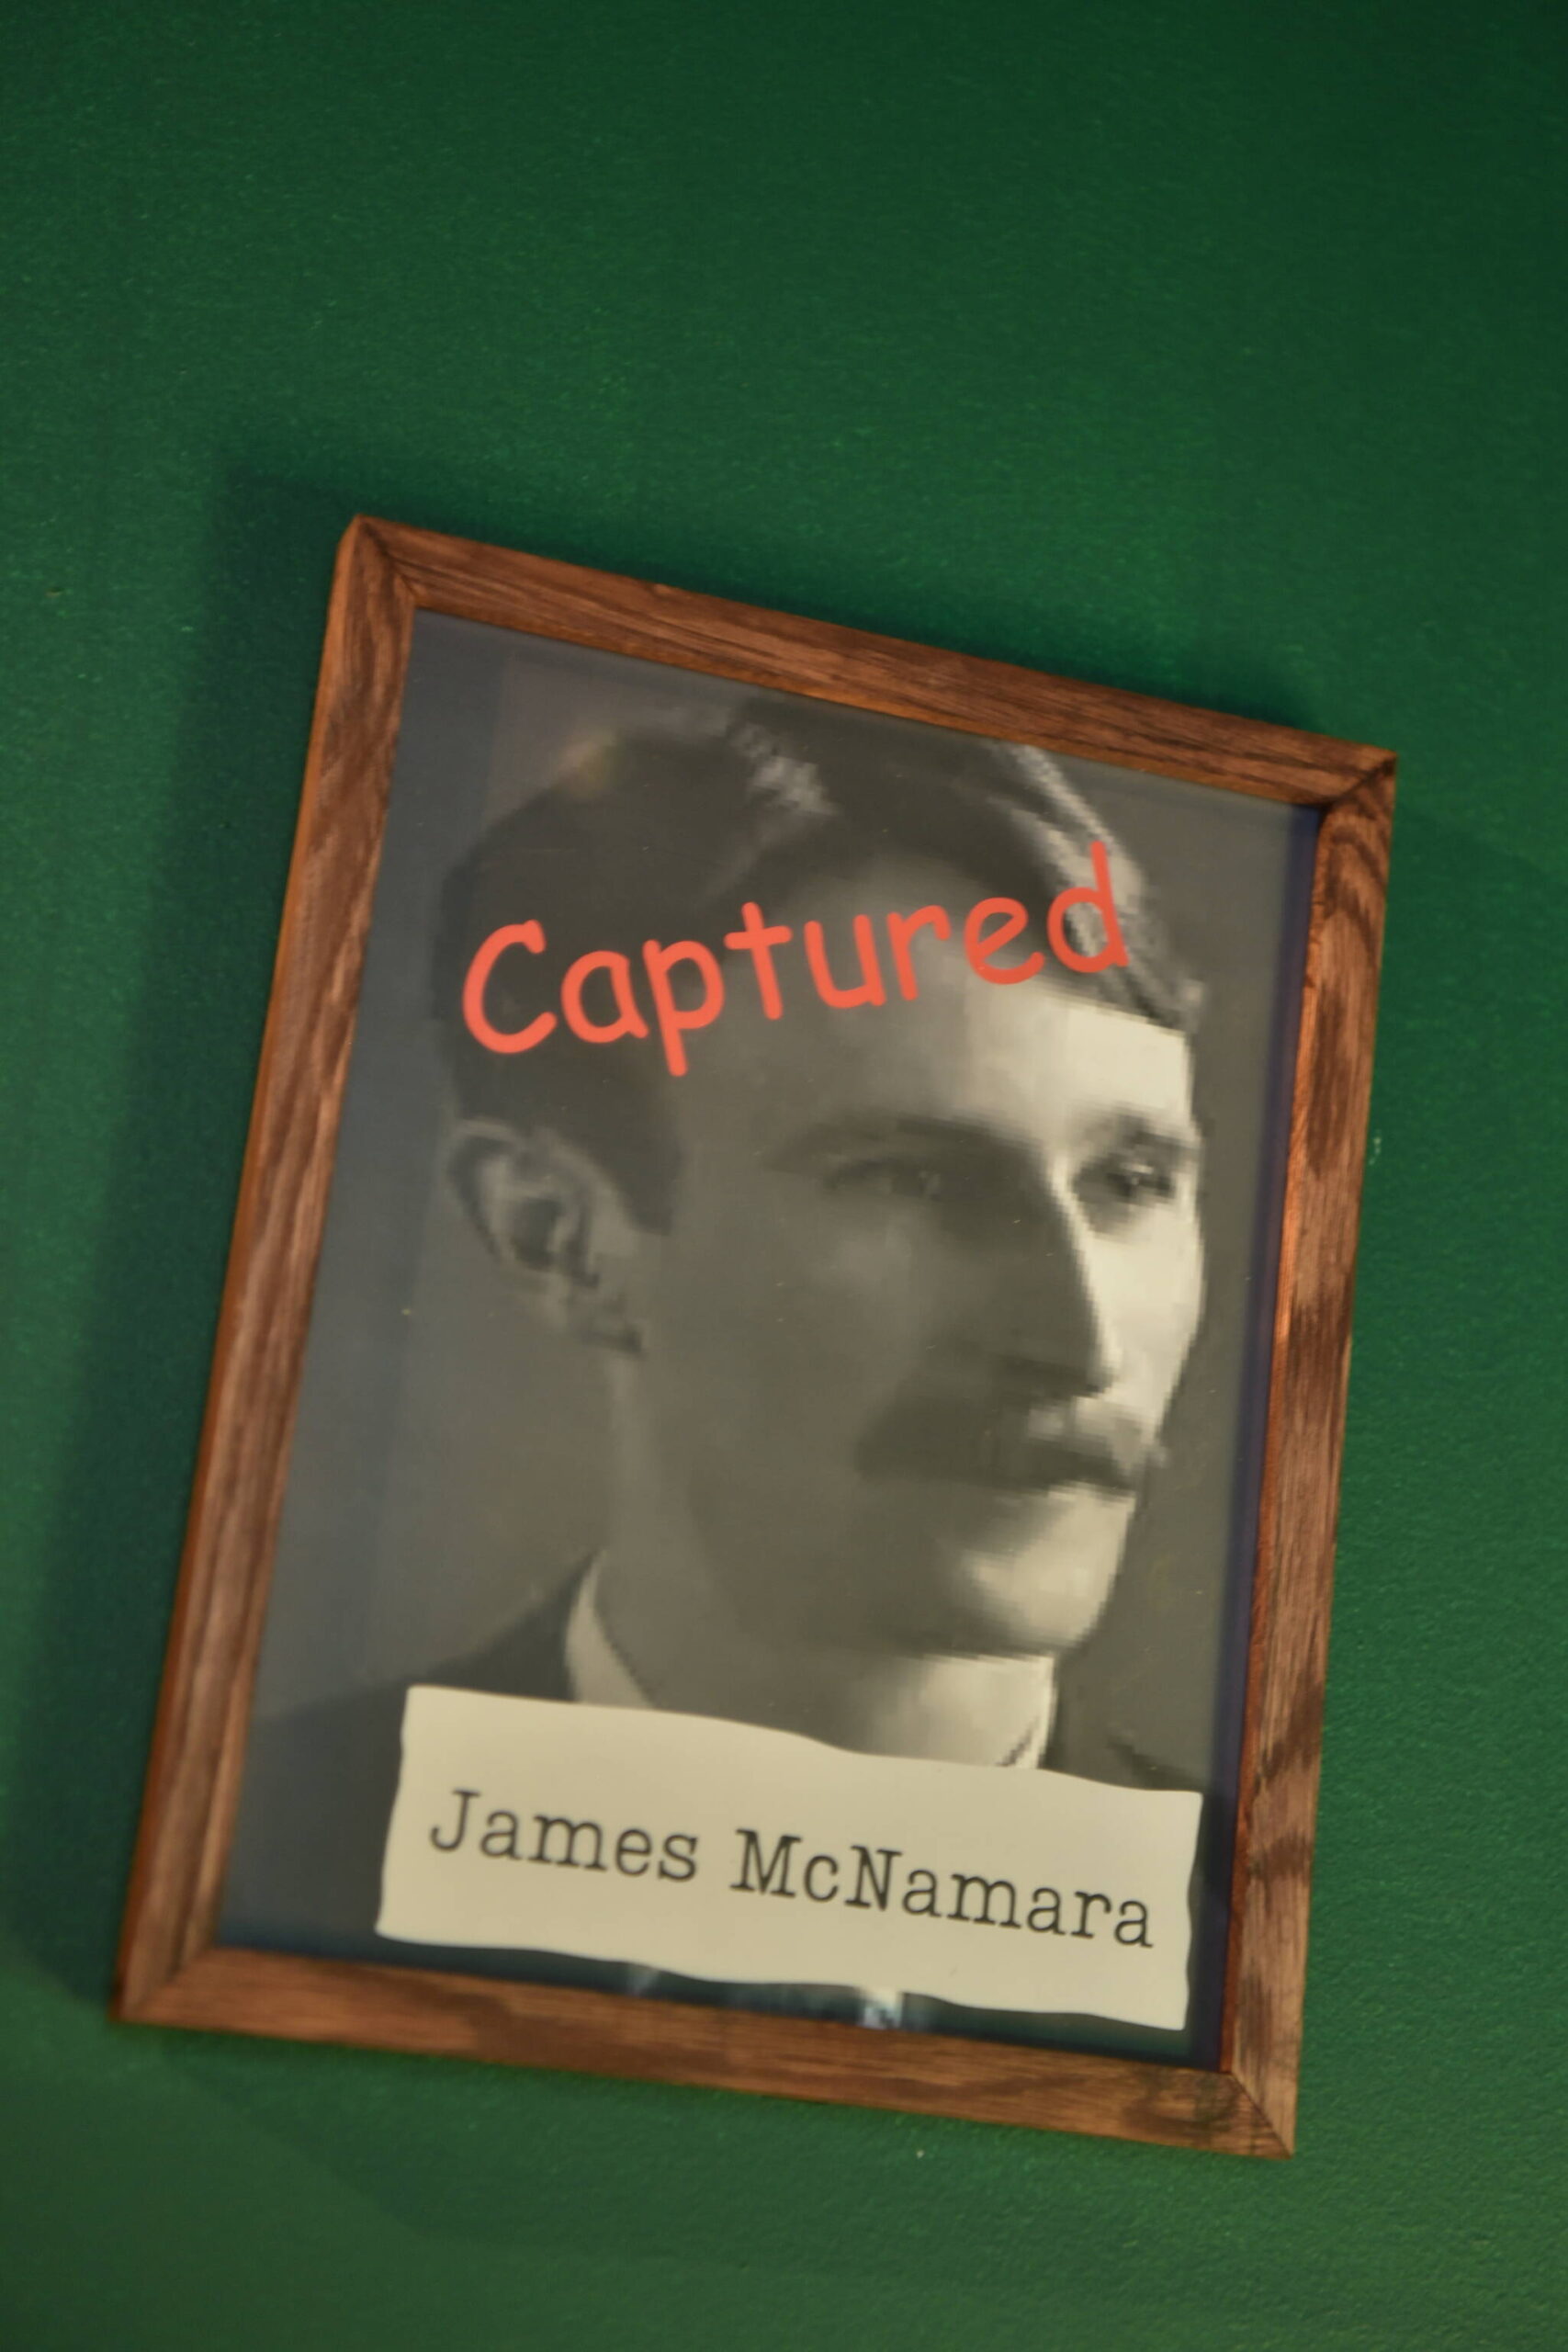 A portrait of James McNamara, one of the five men responsible for the bombing of the LA Times building in 1910 that killed 21 people and injured more than 100, hangs on the wall in the escape room.